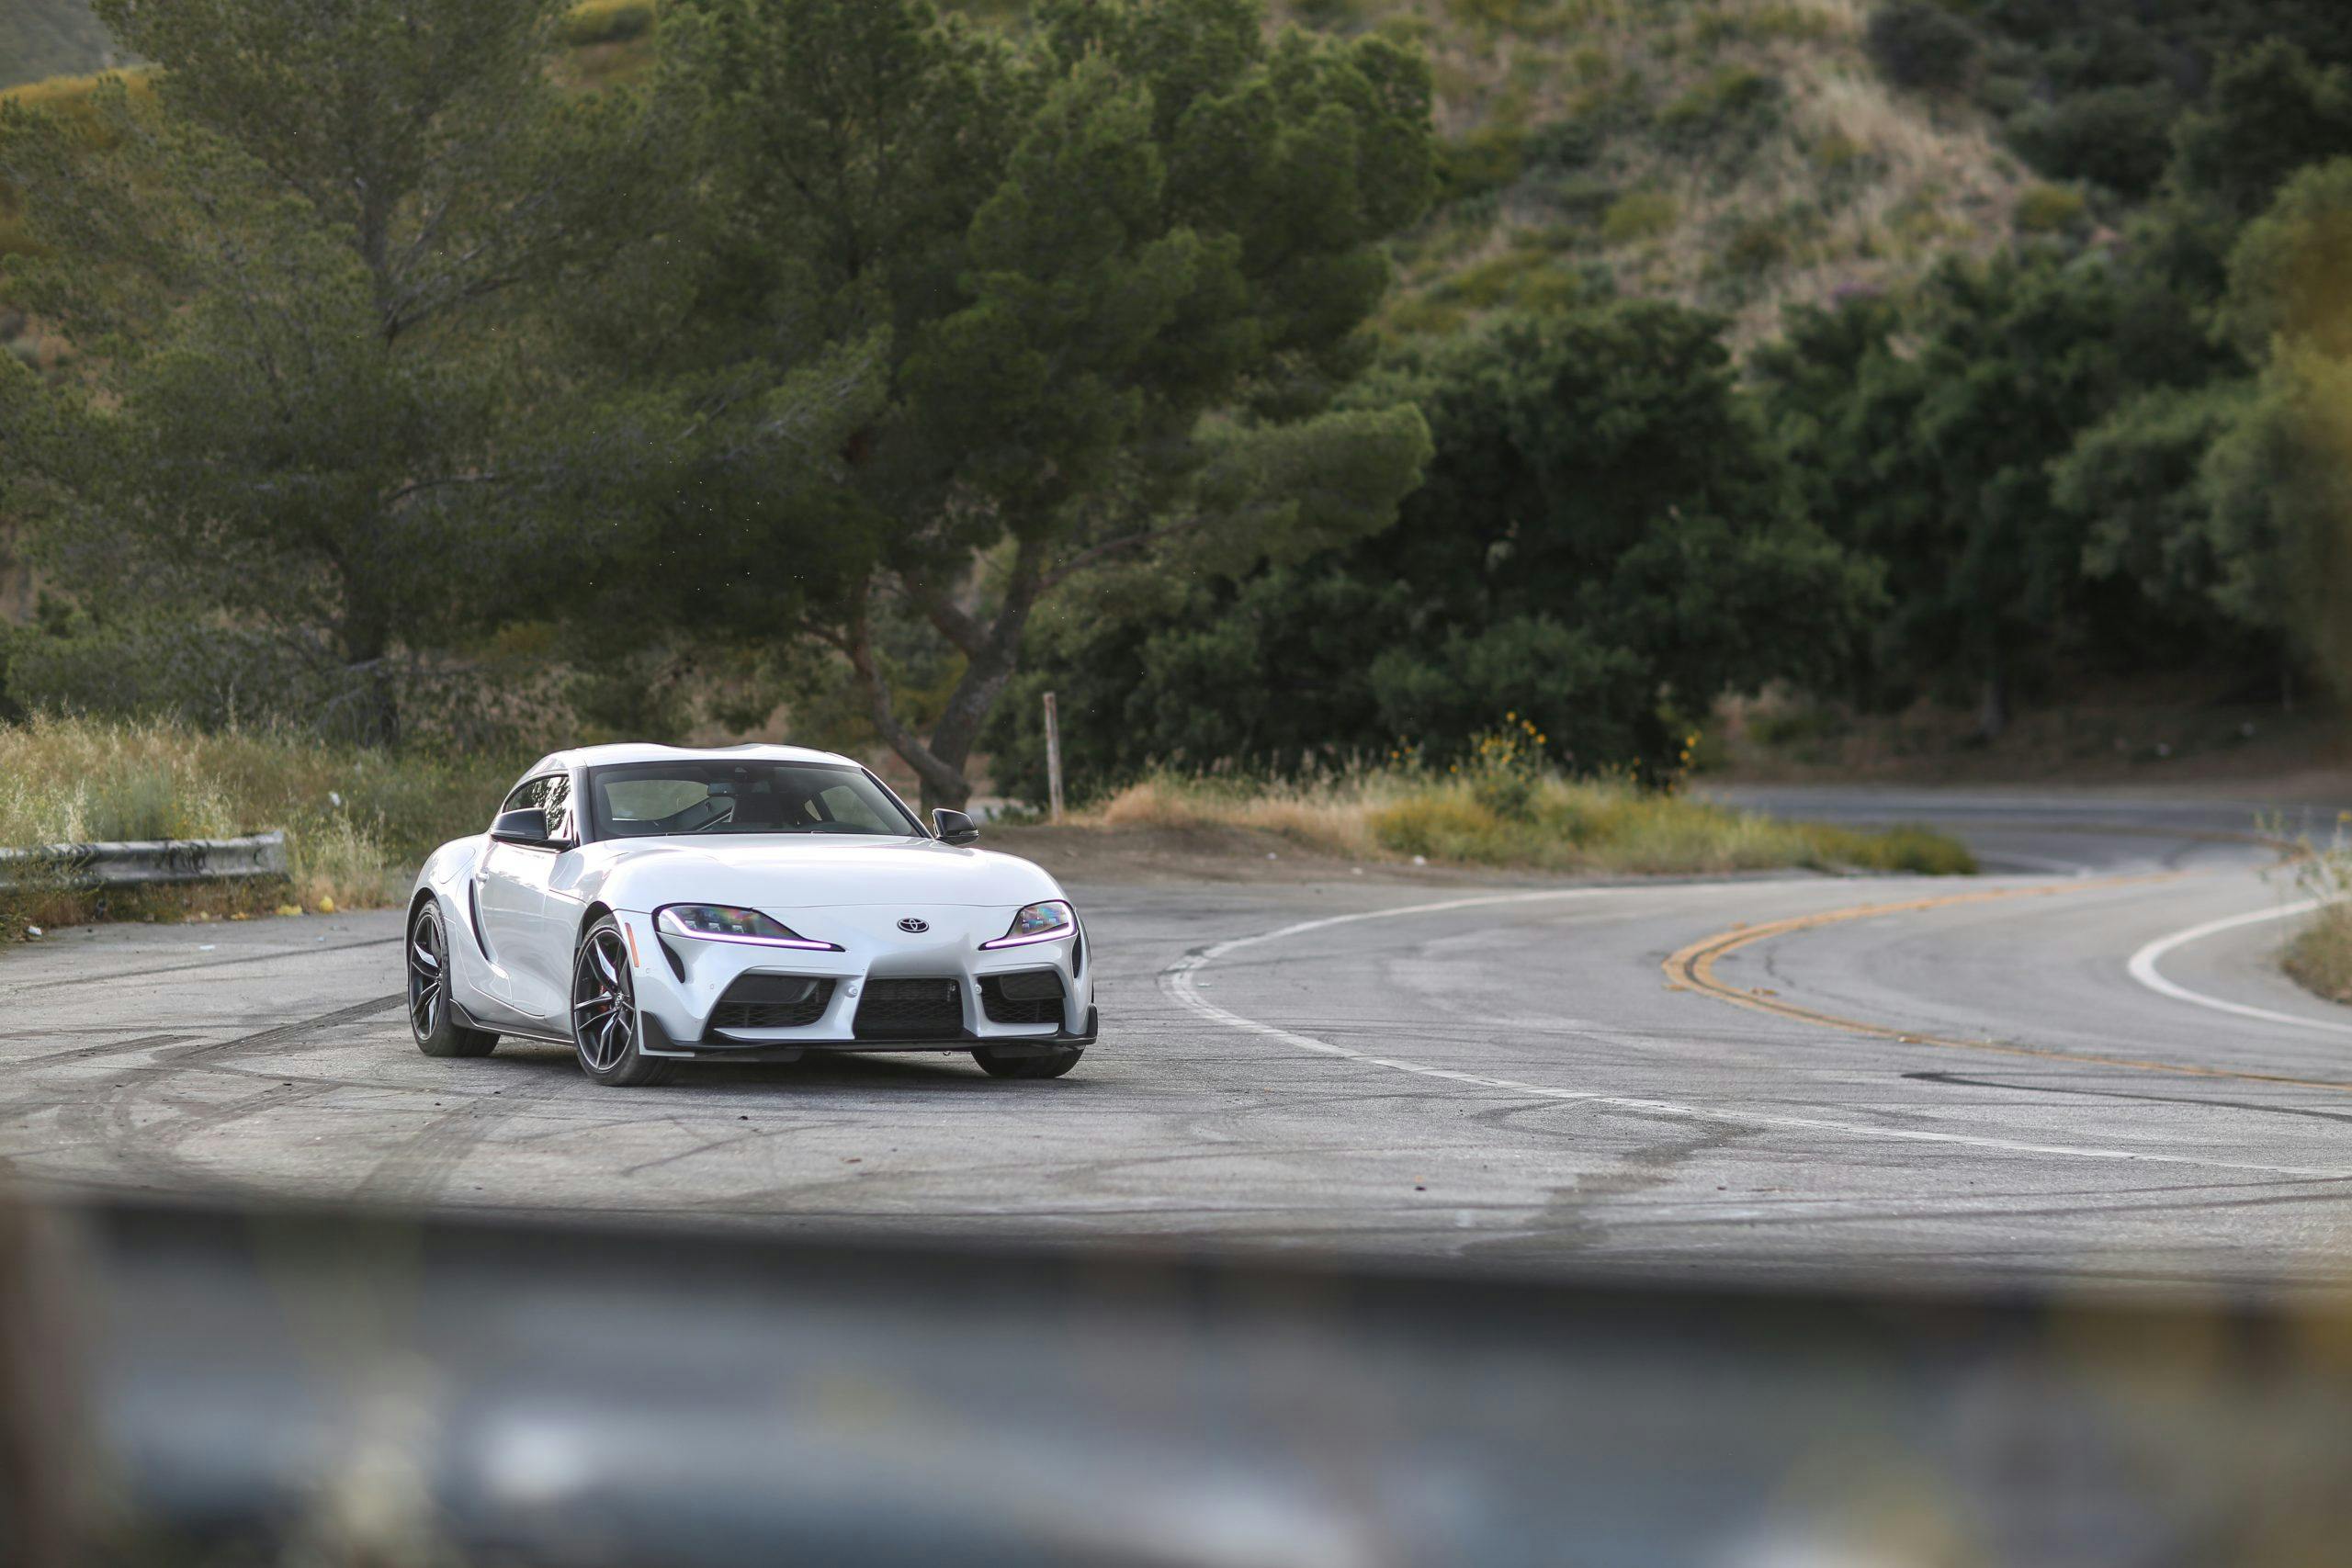 2021 Toyota Supra 3.0 review: Punchier pint-sizer - CNET